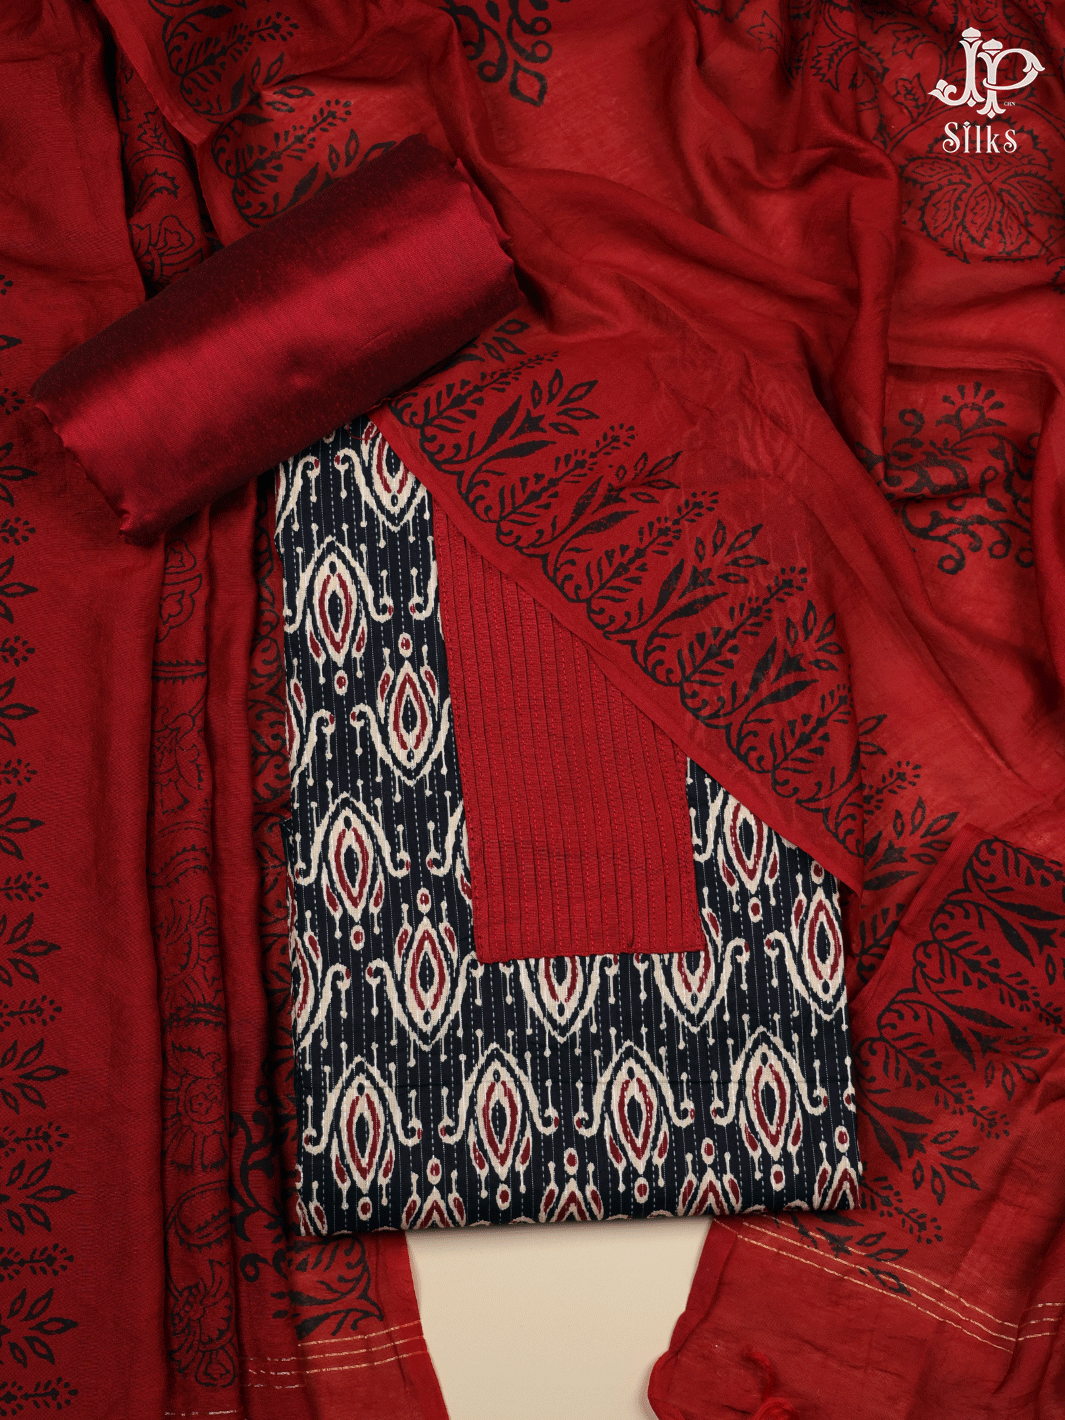 Red and Black Cotton Chudidhar Material - E6127 